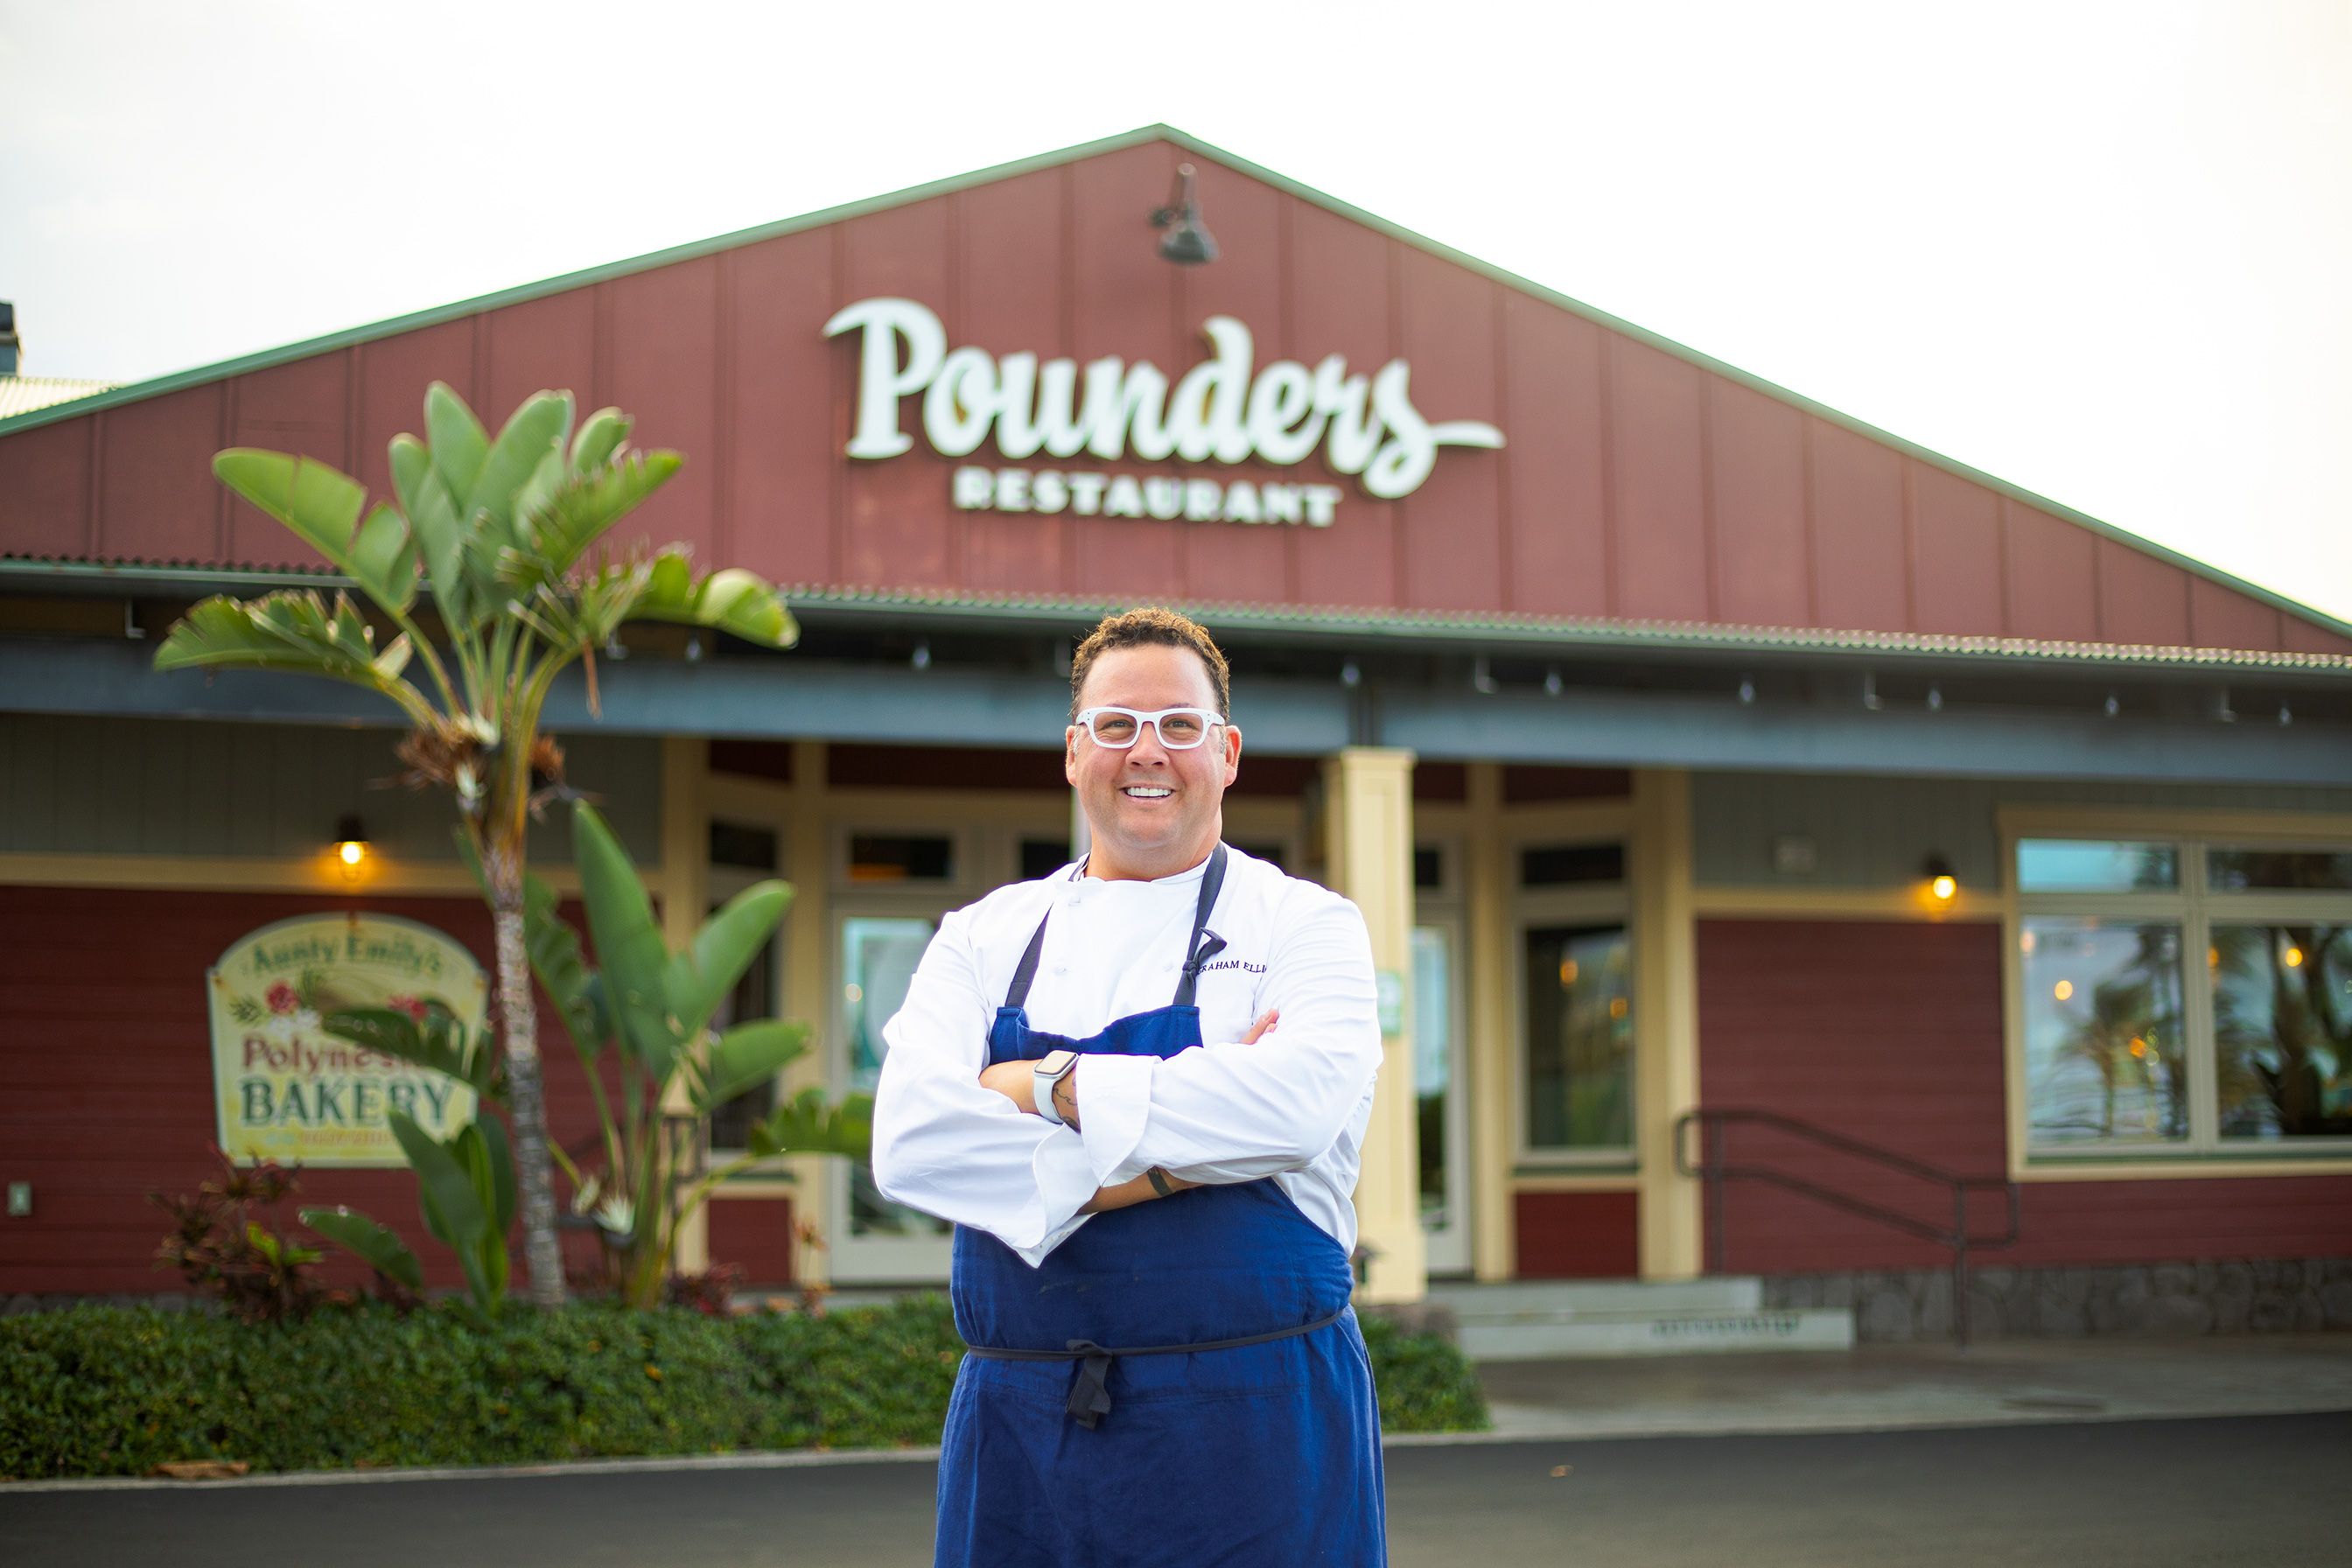 photograph of Graham Elliot from Master Chef and Top Chef standing outside of Pounders Restaurant at the Polynesian Cultural Center in Laie Oahu Hawaii where he has been named Executive Chef